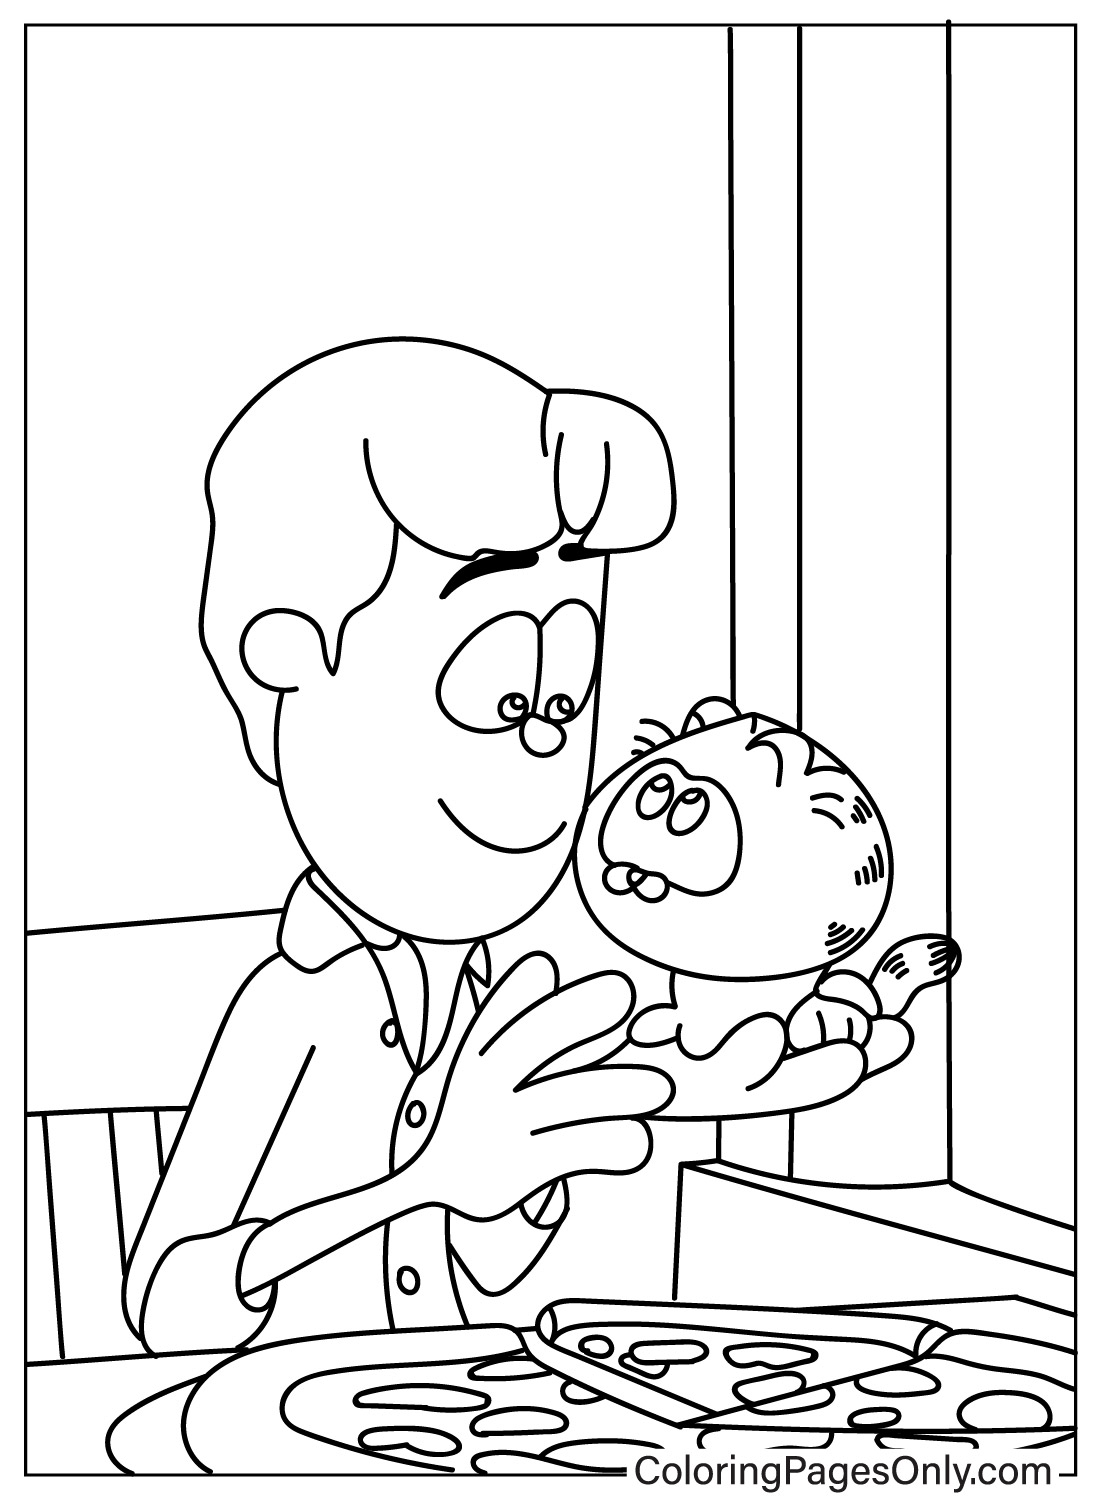 Jon Arbuckle and Garfield Coloring Page Free from Garfield